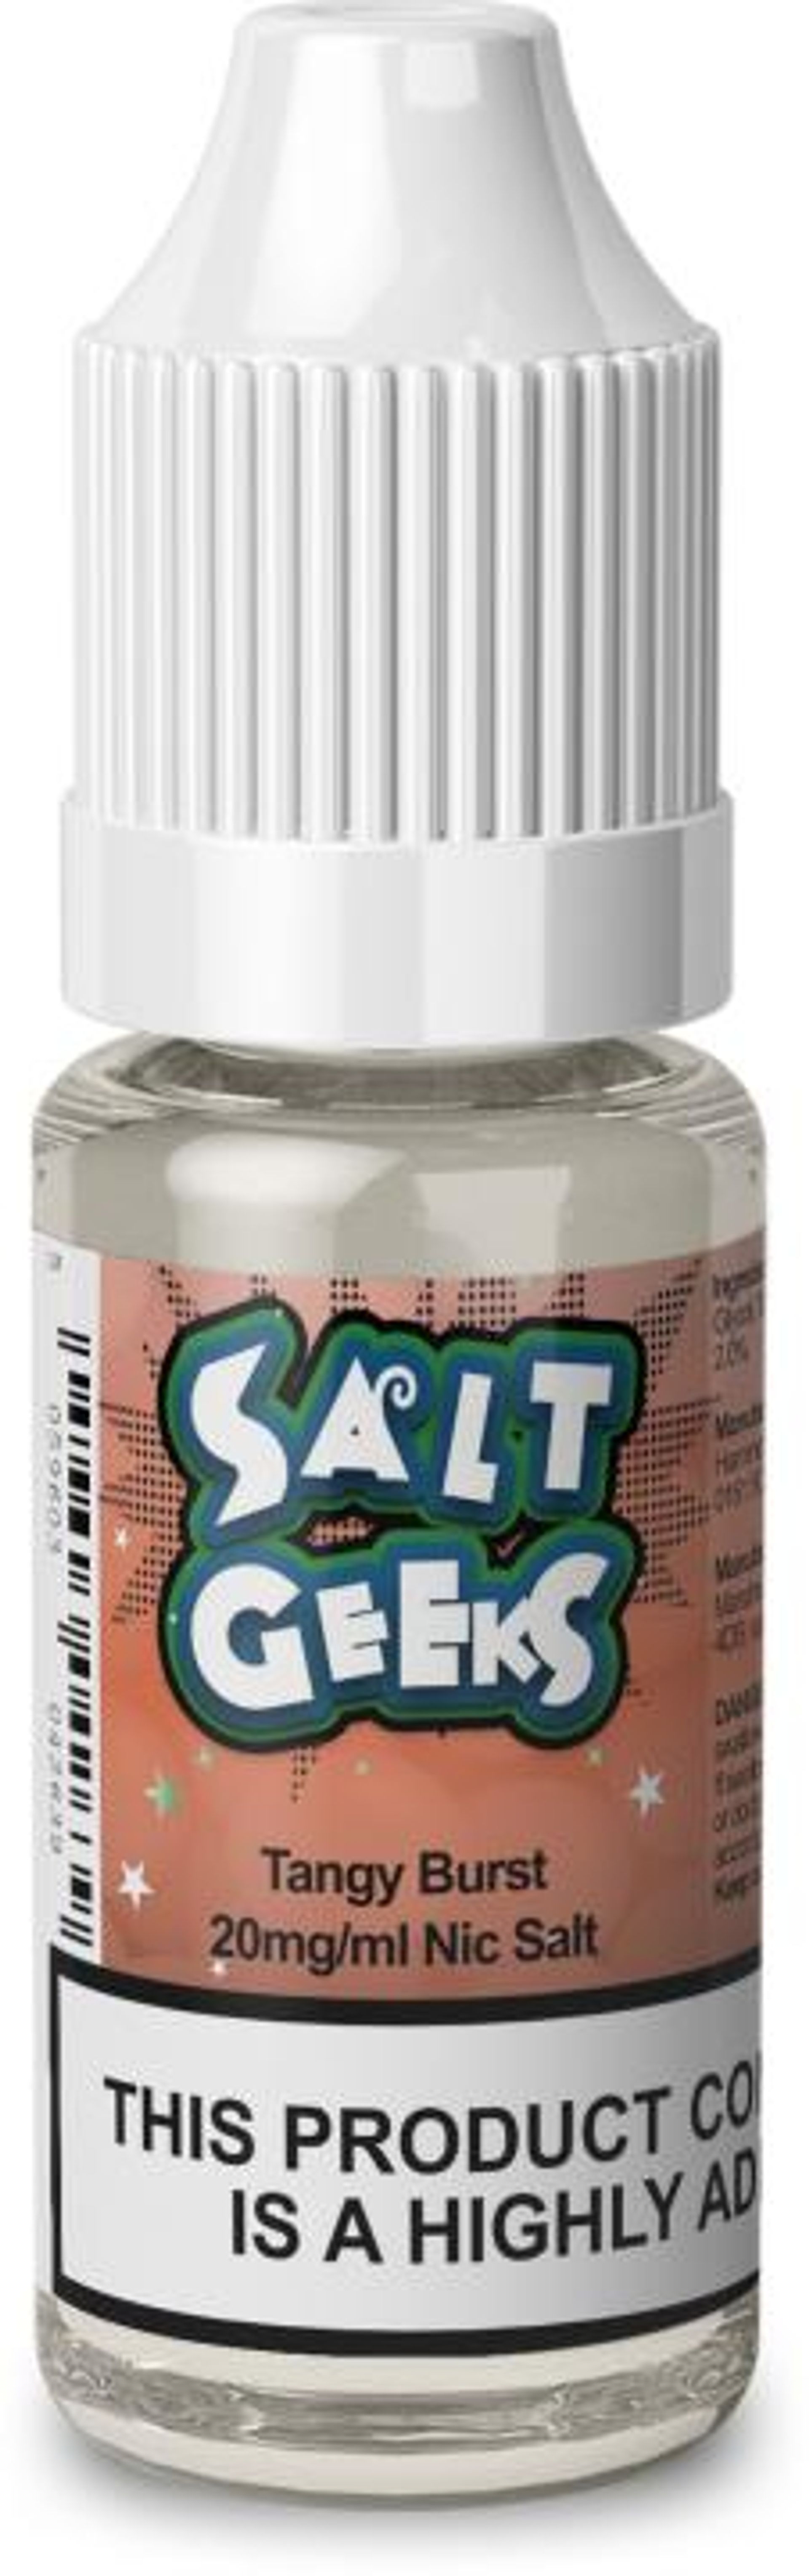 Image of Tangy Burst by Salt Geeks